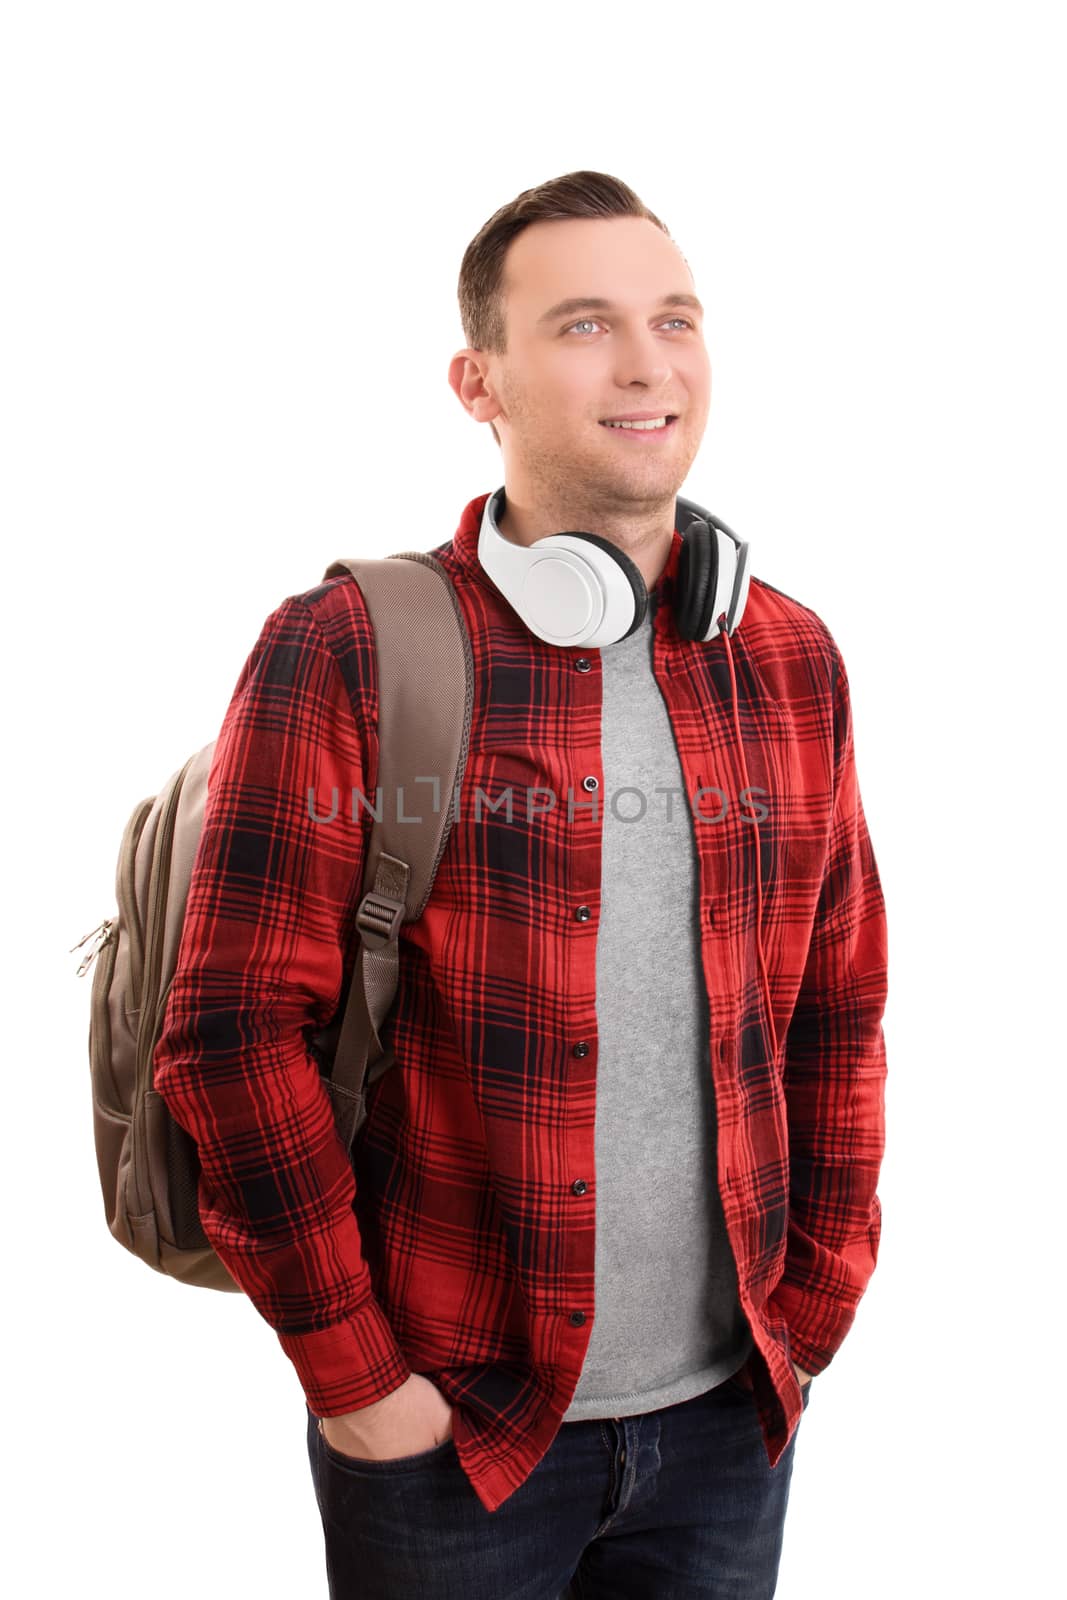 Smiling male student with headphones by Mendelex